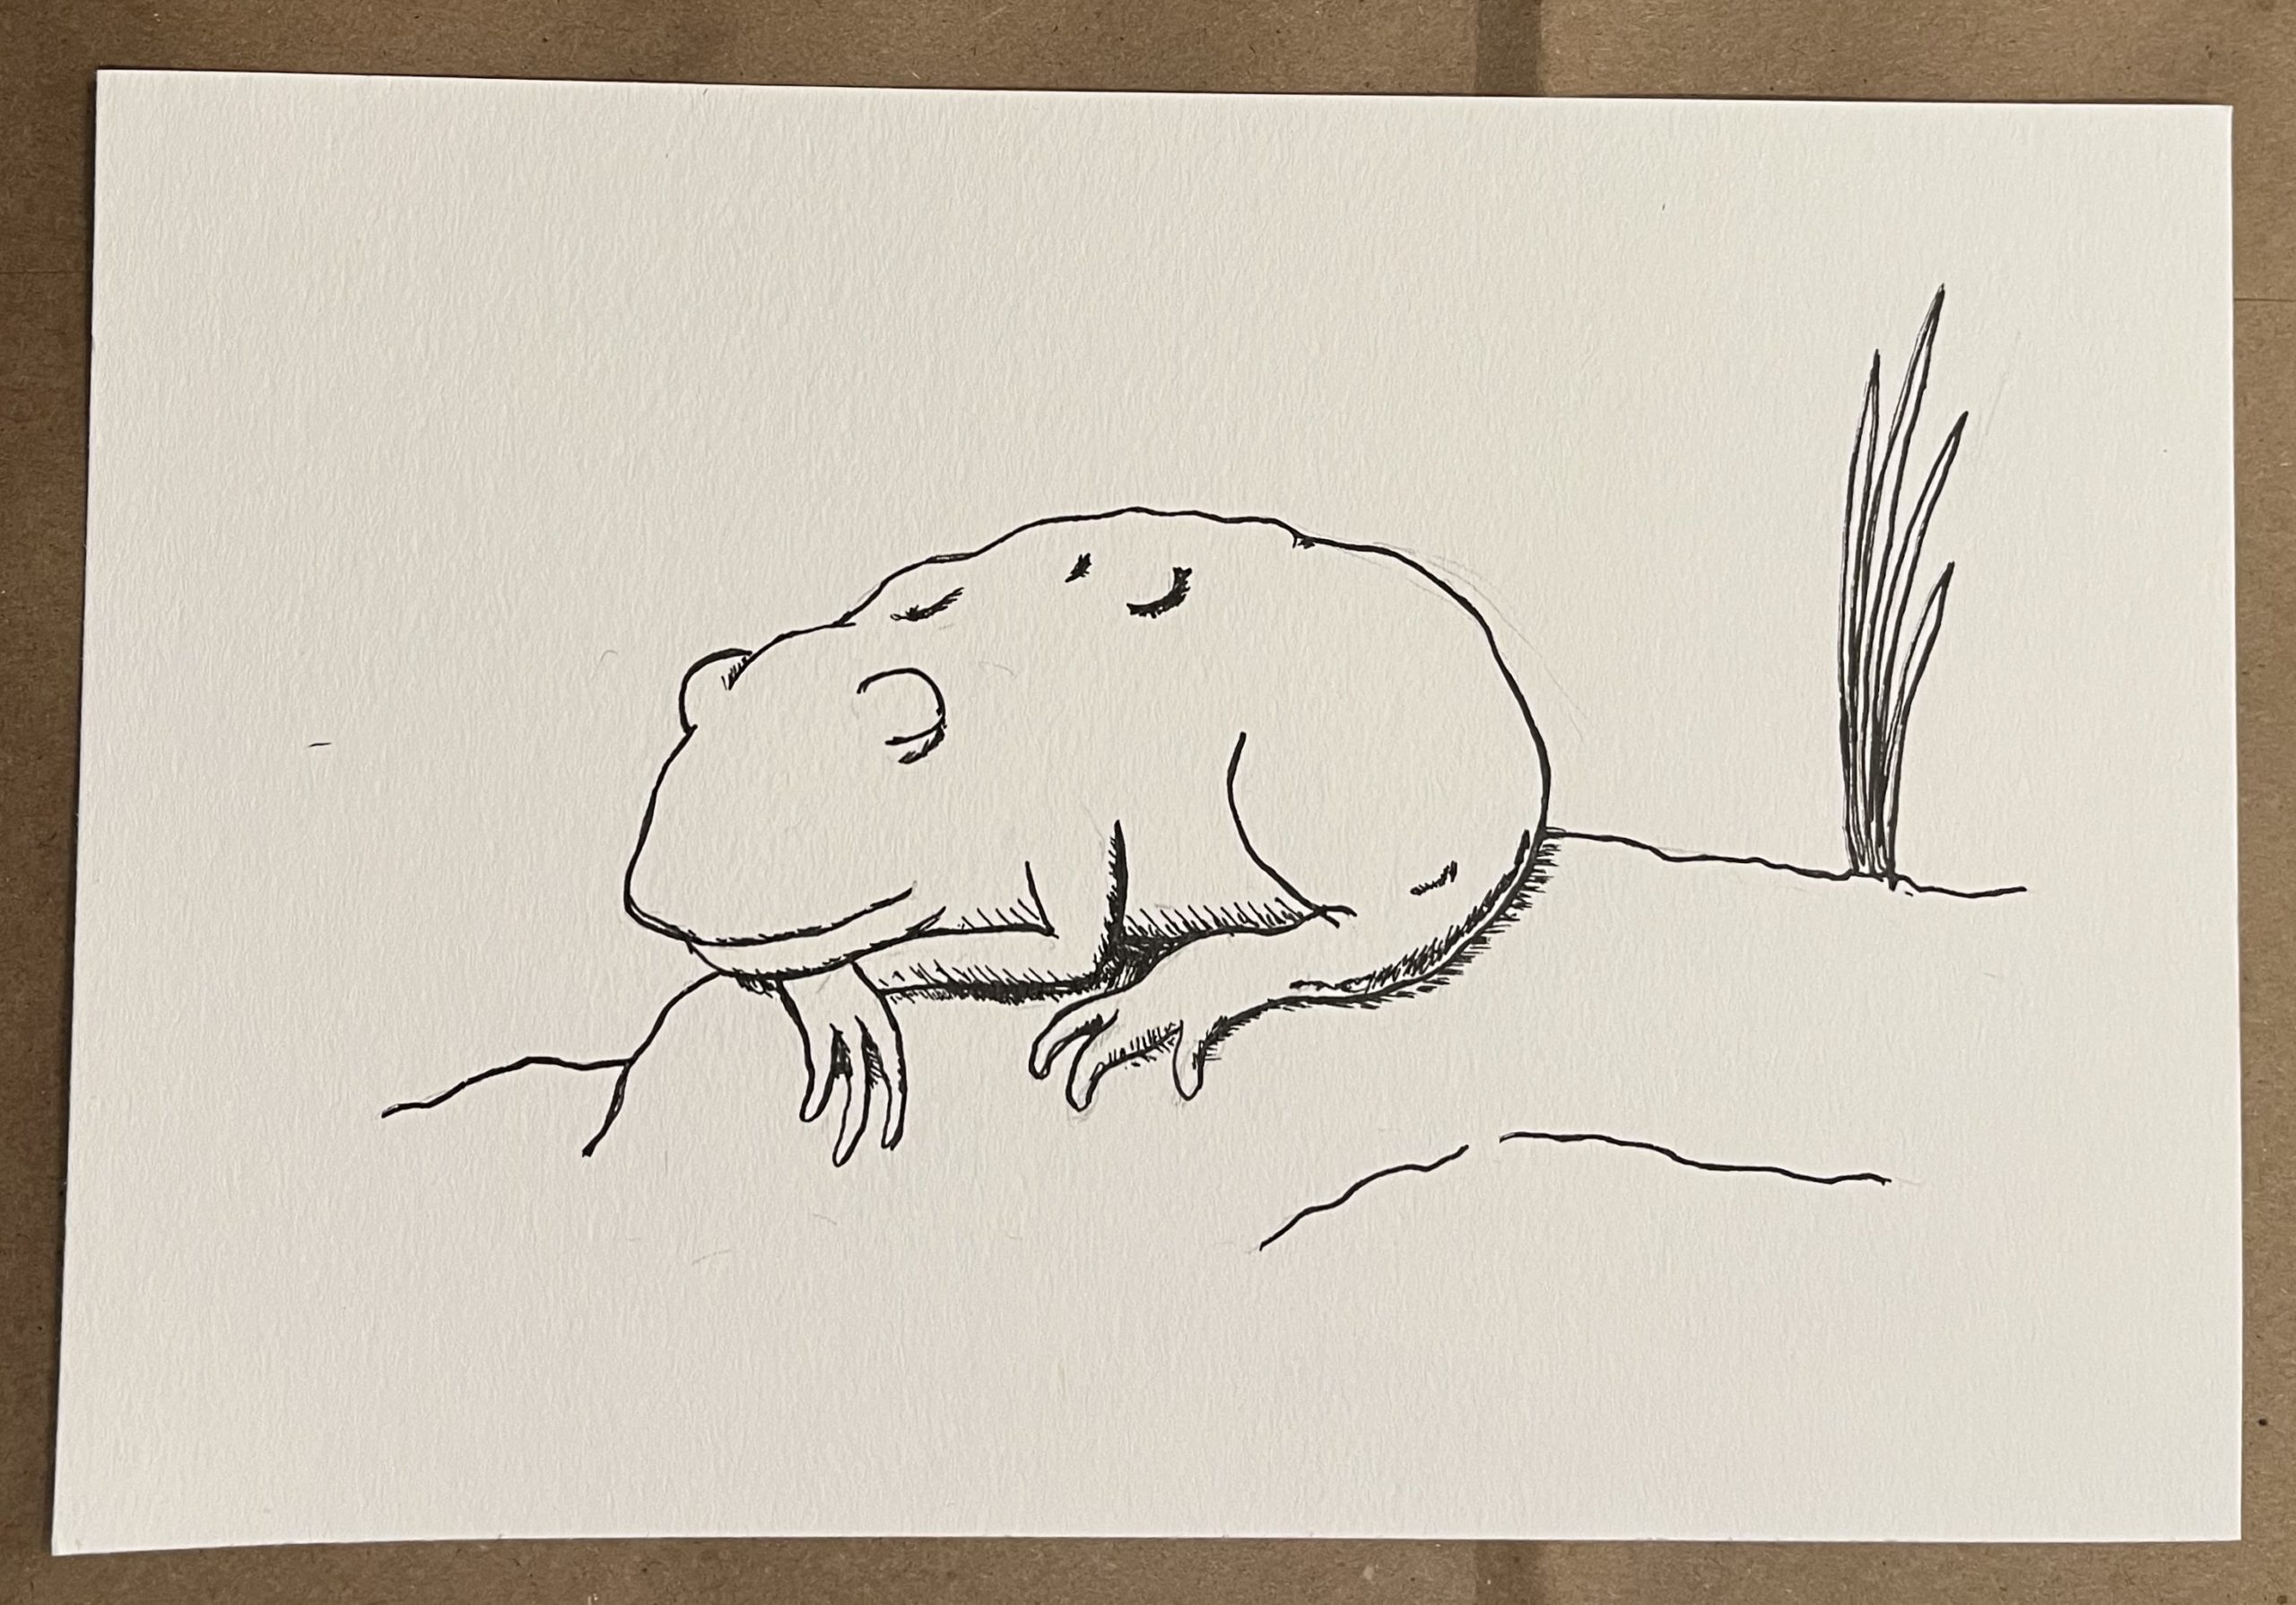 An ink drawing of a sleeping toad.